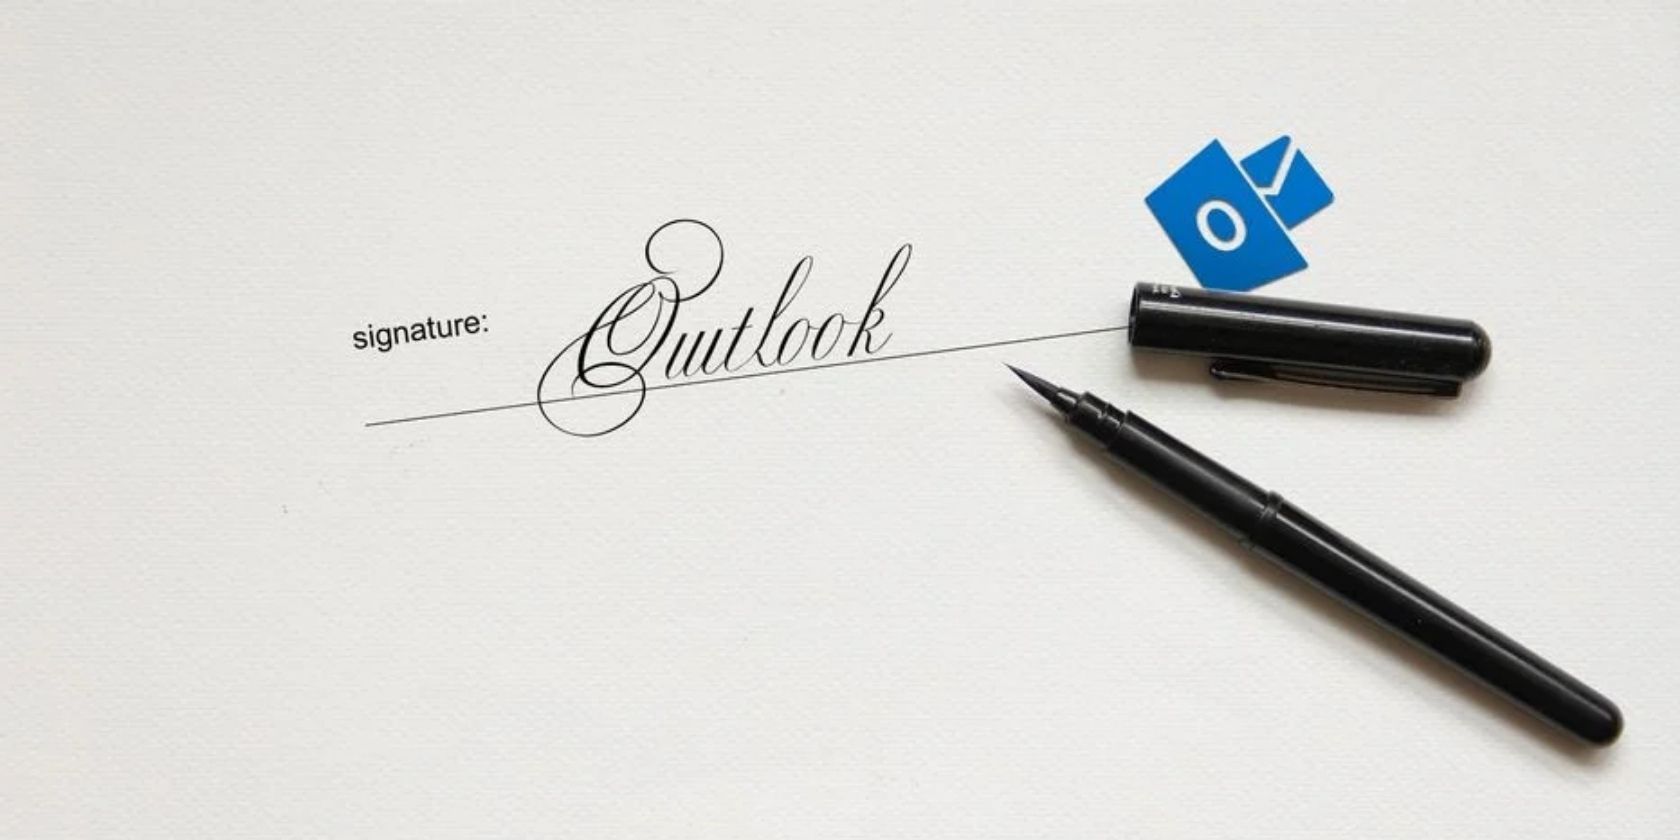 Signature in Outlook